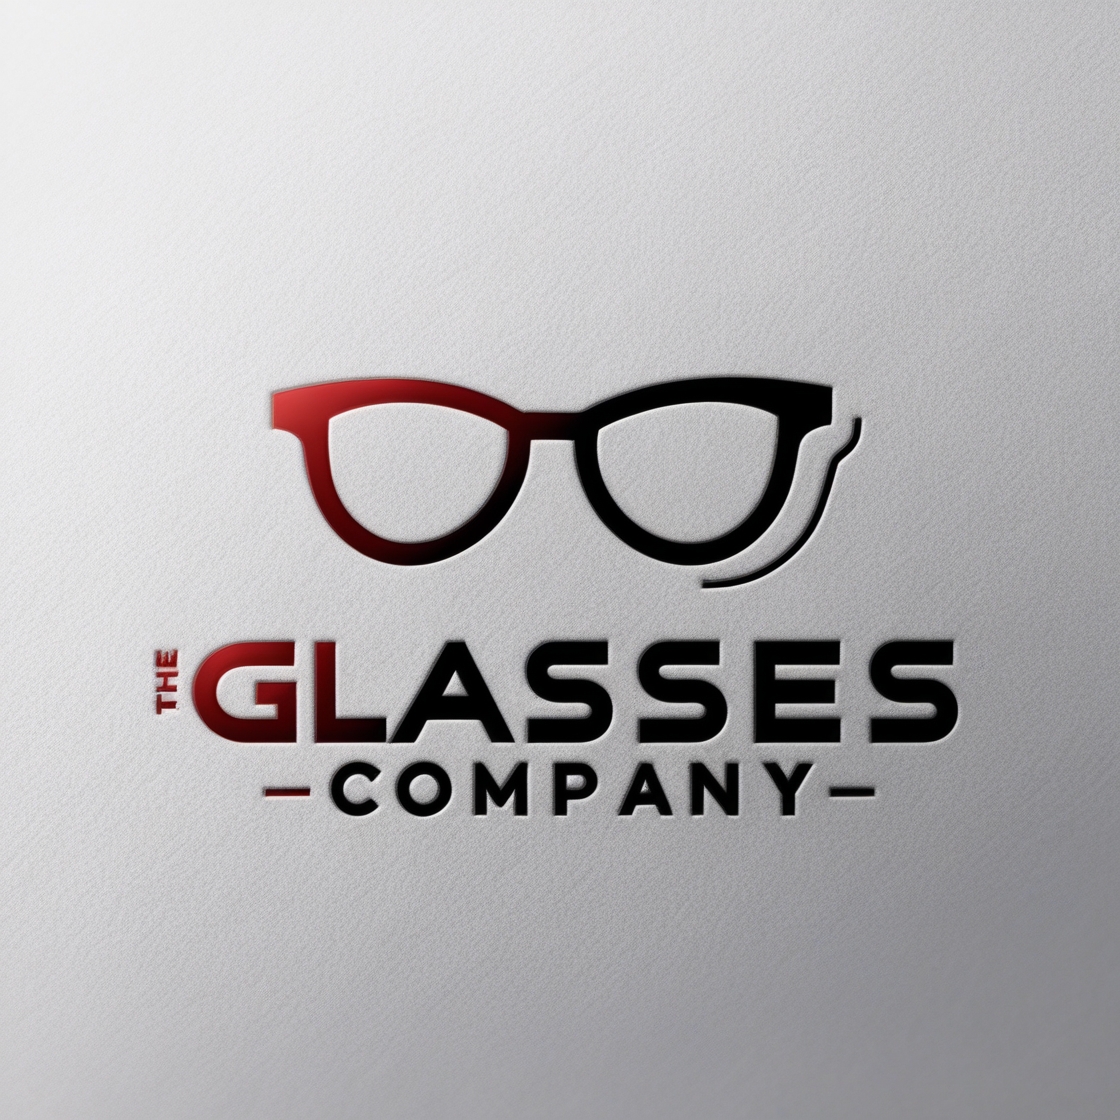 Default_Create_a_logo_for_a_glasses_companyThe_logo_would_be_c_1.jpg